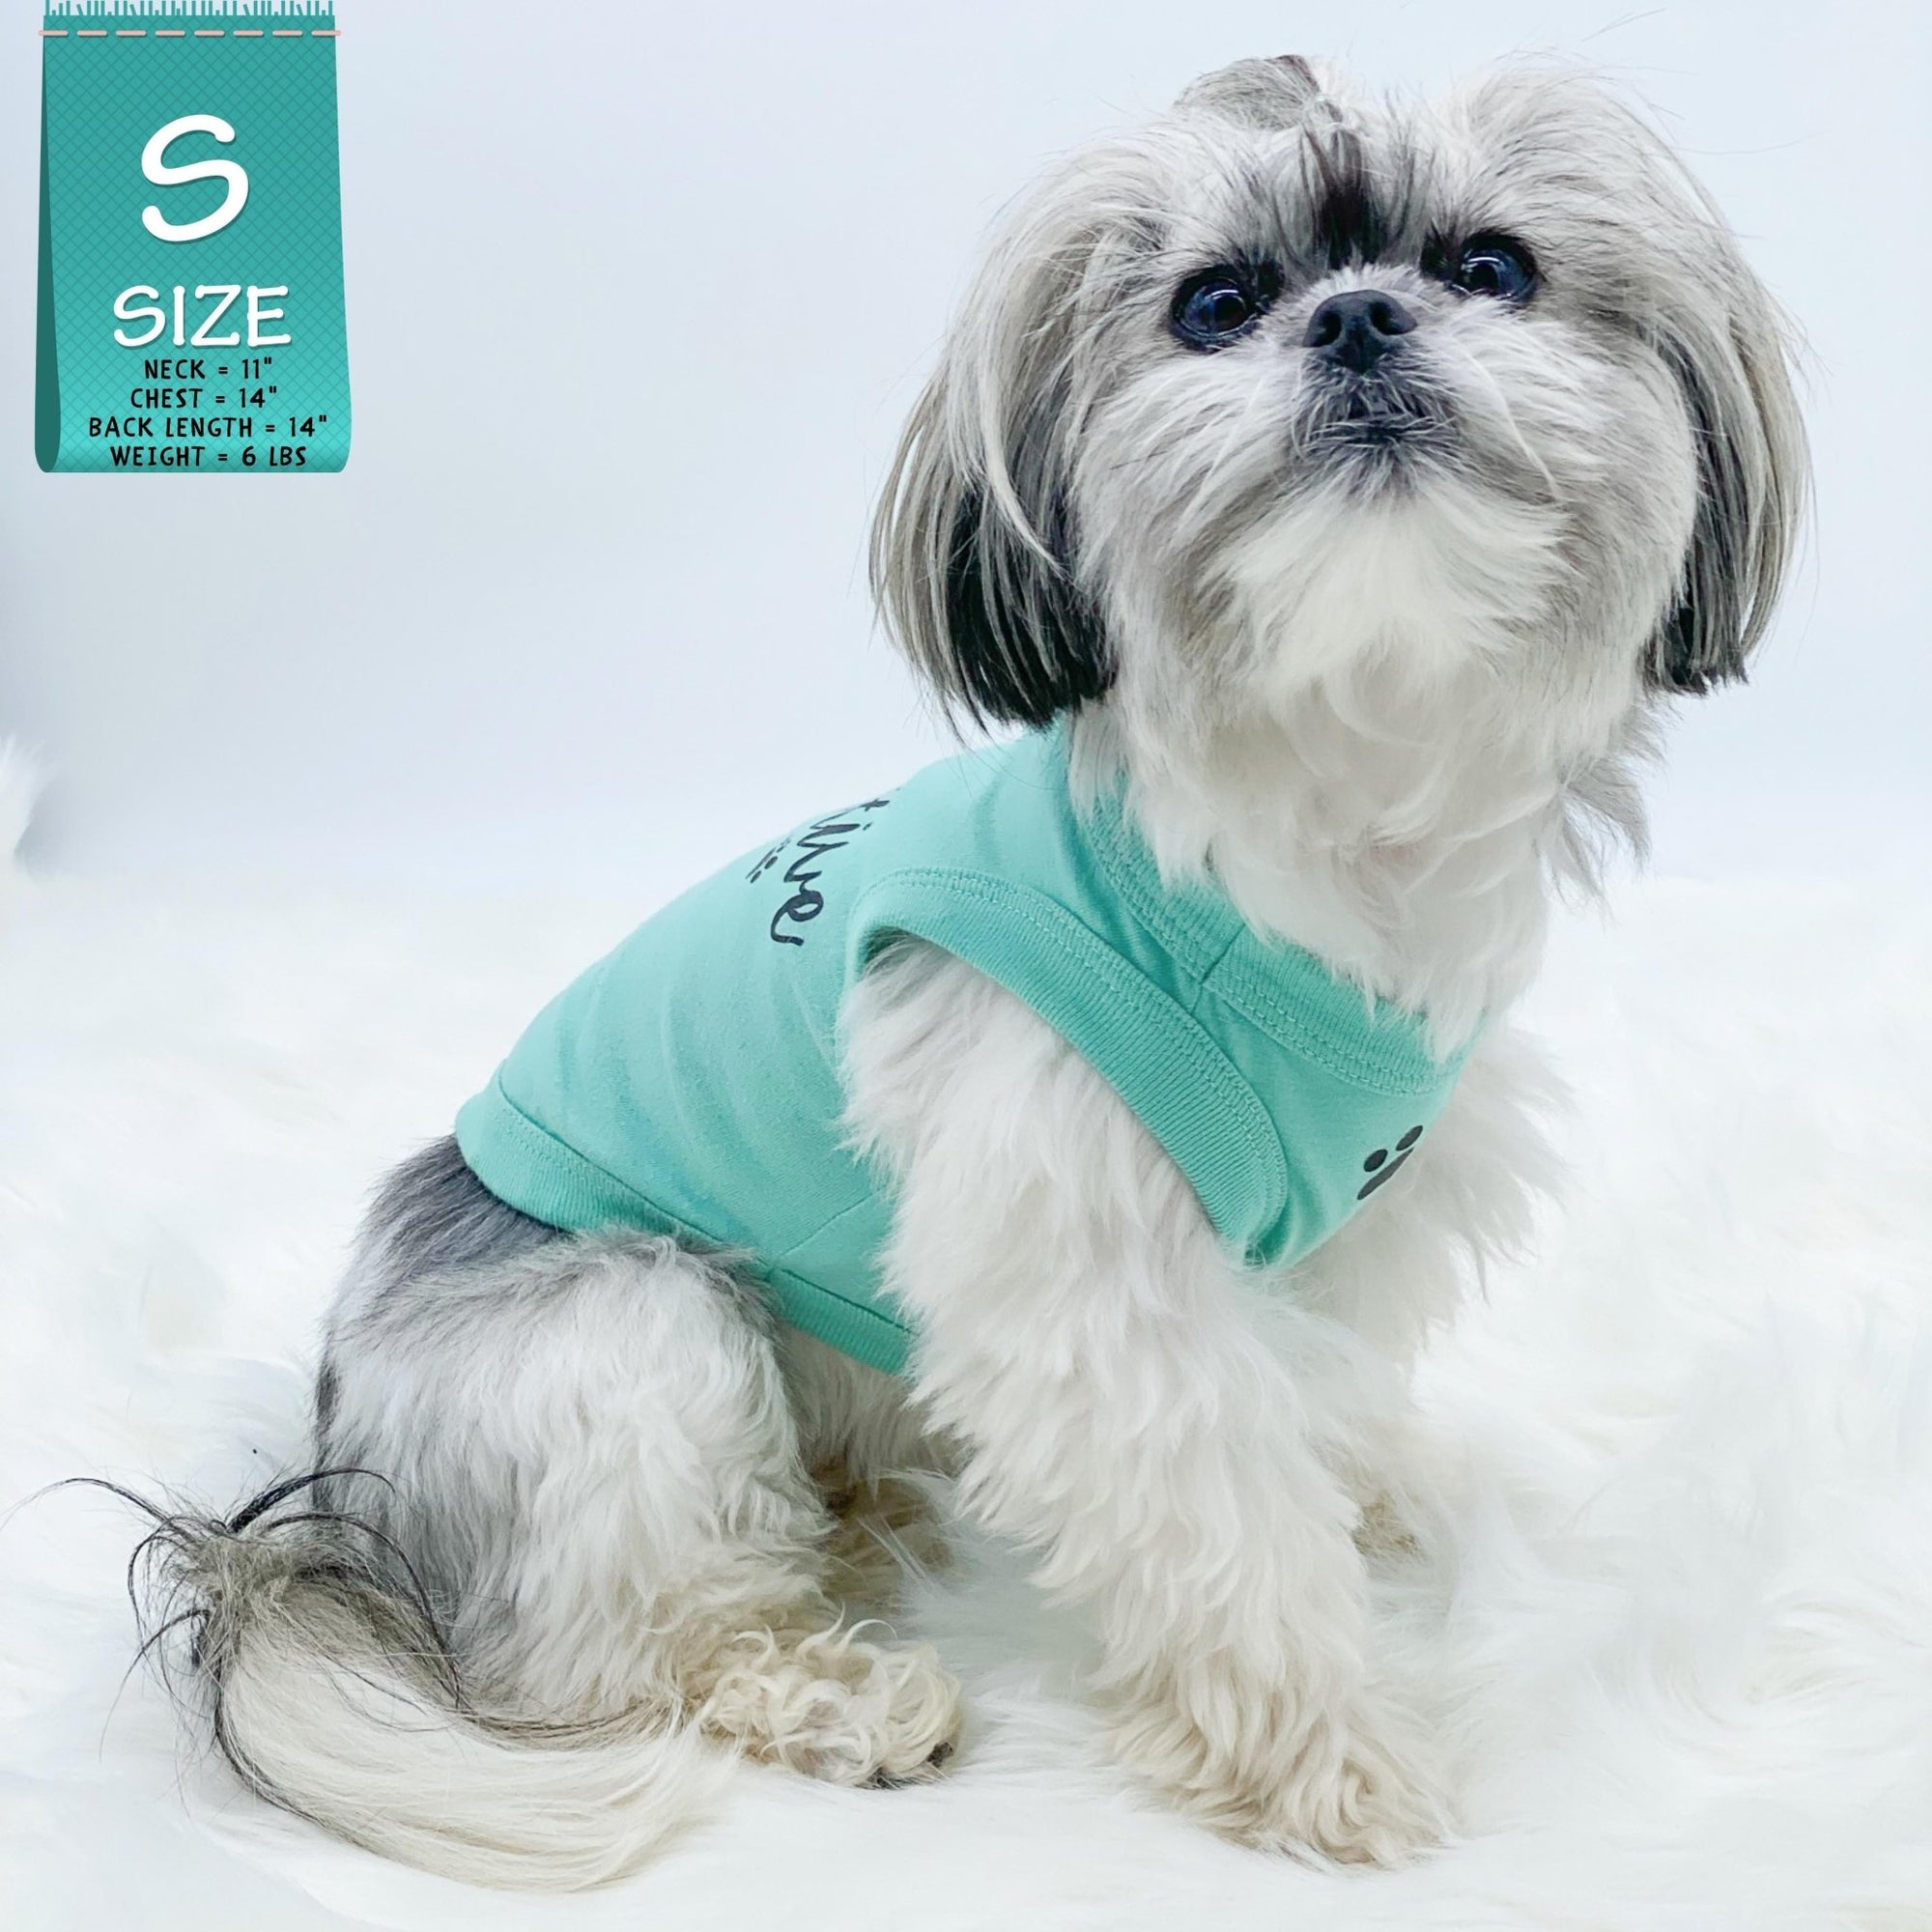 Dog T-Shirt - Shih Tzu mix wearing &quot;Stay Pawsitive&quot; teal dog t-shirt - with &quot;Stay Pawsitive&quot; lettering in black on back and a paw print emoji in black on chest - against solid white background - Wag Trendz